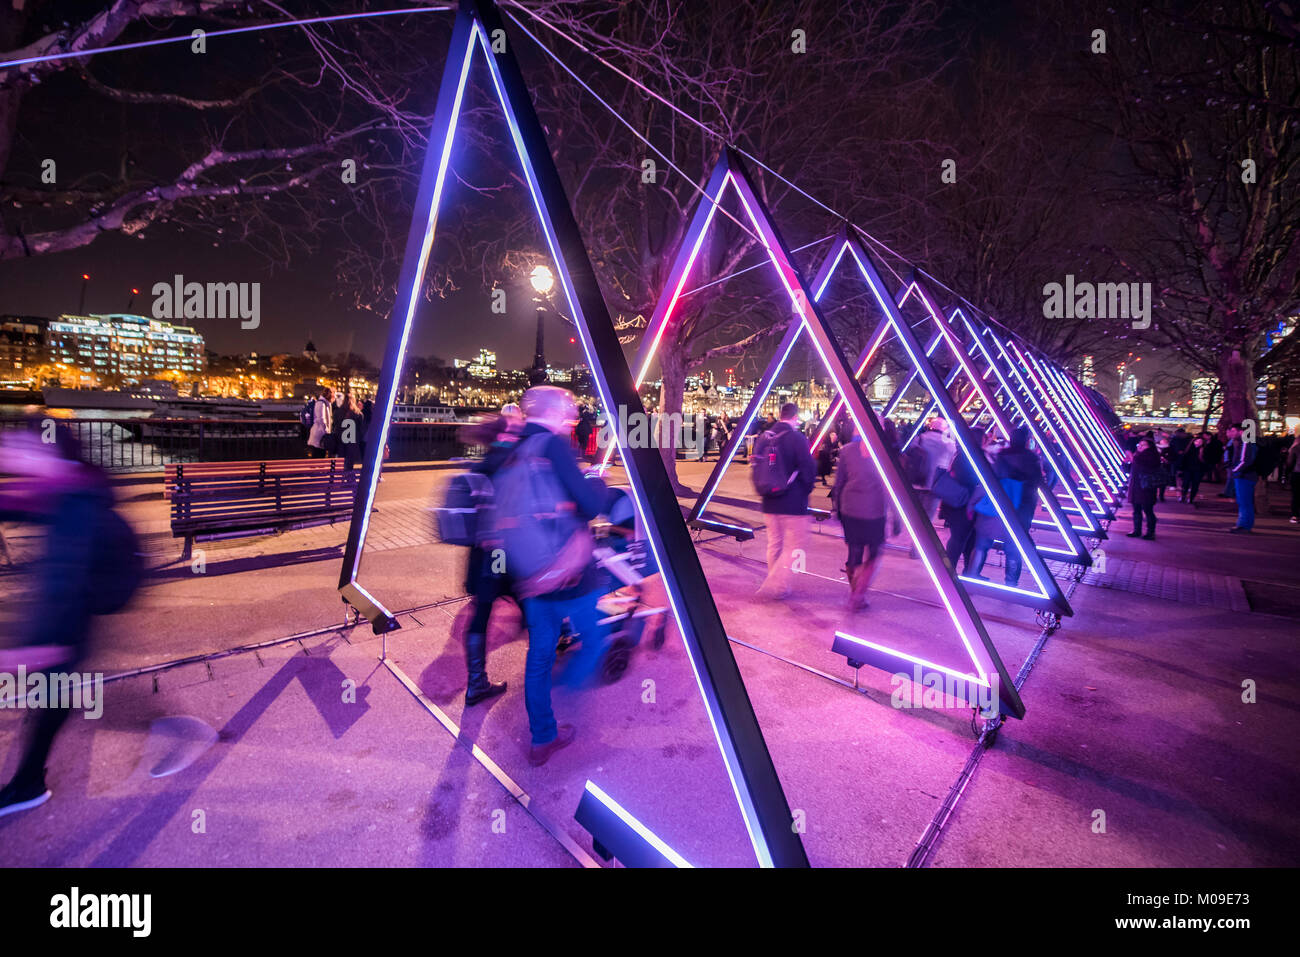 London, UK. 19th January, 2018. THE WAVE Vertigo on Riverside Walkway - Lumiere London is a light festival that takes place over four evenings, from Thursday 18 to Sunday 21 January 2018. It showcases the capital’s architecture and streets, with more than 50 works created by leading UK and international artists. The free outdoor festival returns to London for the second time following the success of the first edition in January 2016, which attracted an estimated 1.3 million visits. Credit: Guy Bell/Alamy Live News Stock Photo